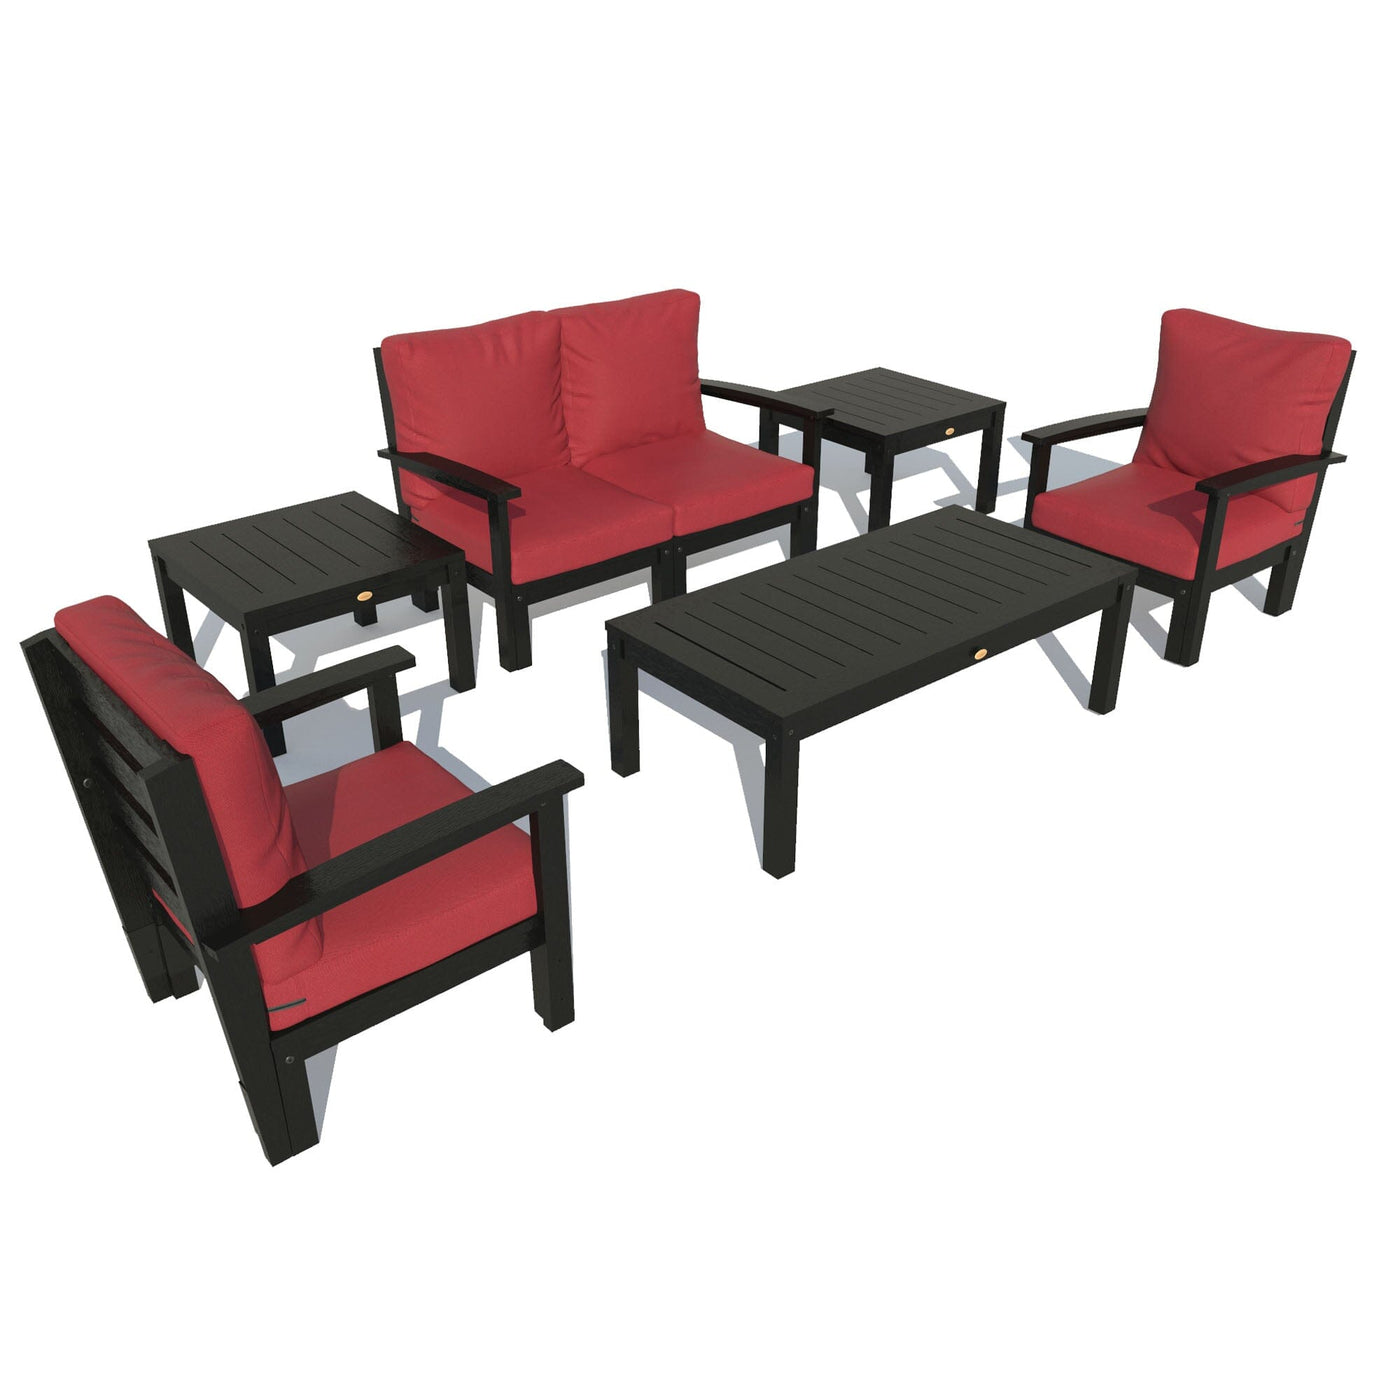 Bespoke Deep Seating: Loveseat, Set of 2 Chairs, Conversation Table, and 2 Side Tables Deep Seating Highwood USA Firecracker Red Black 